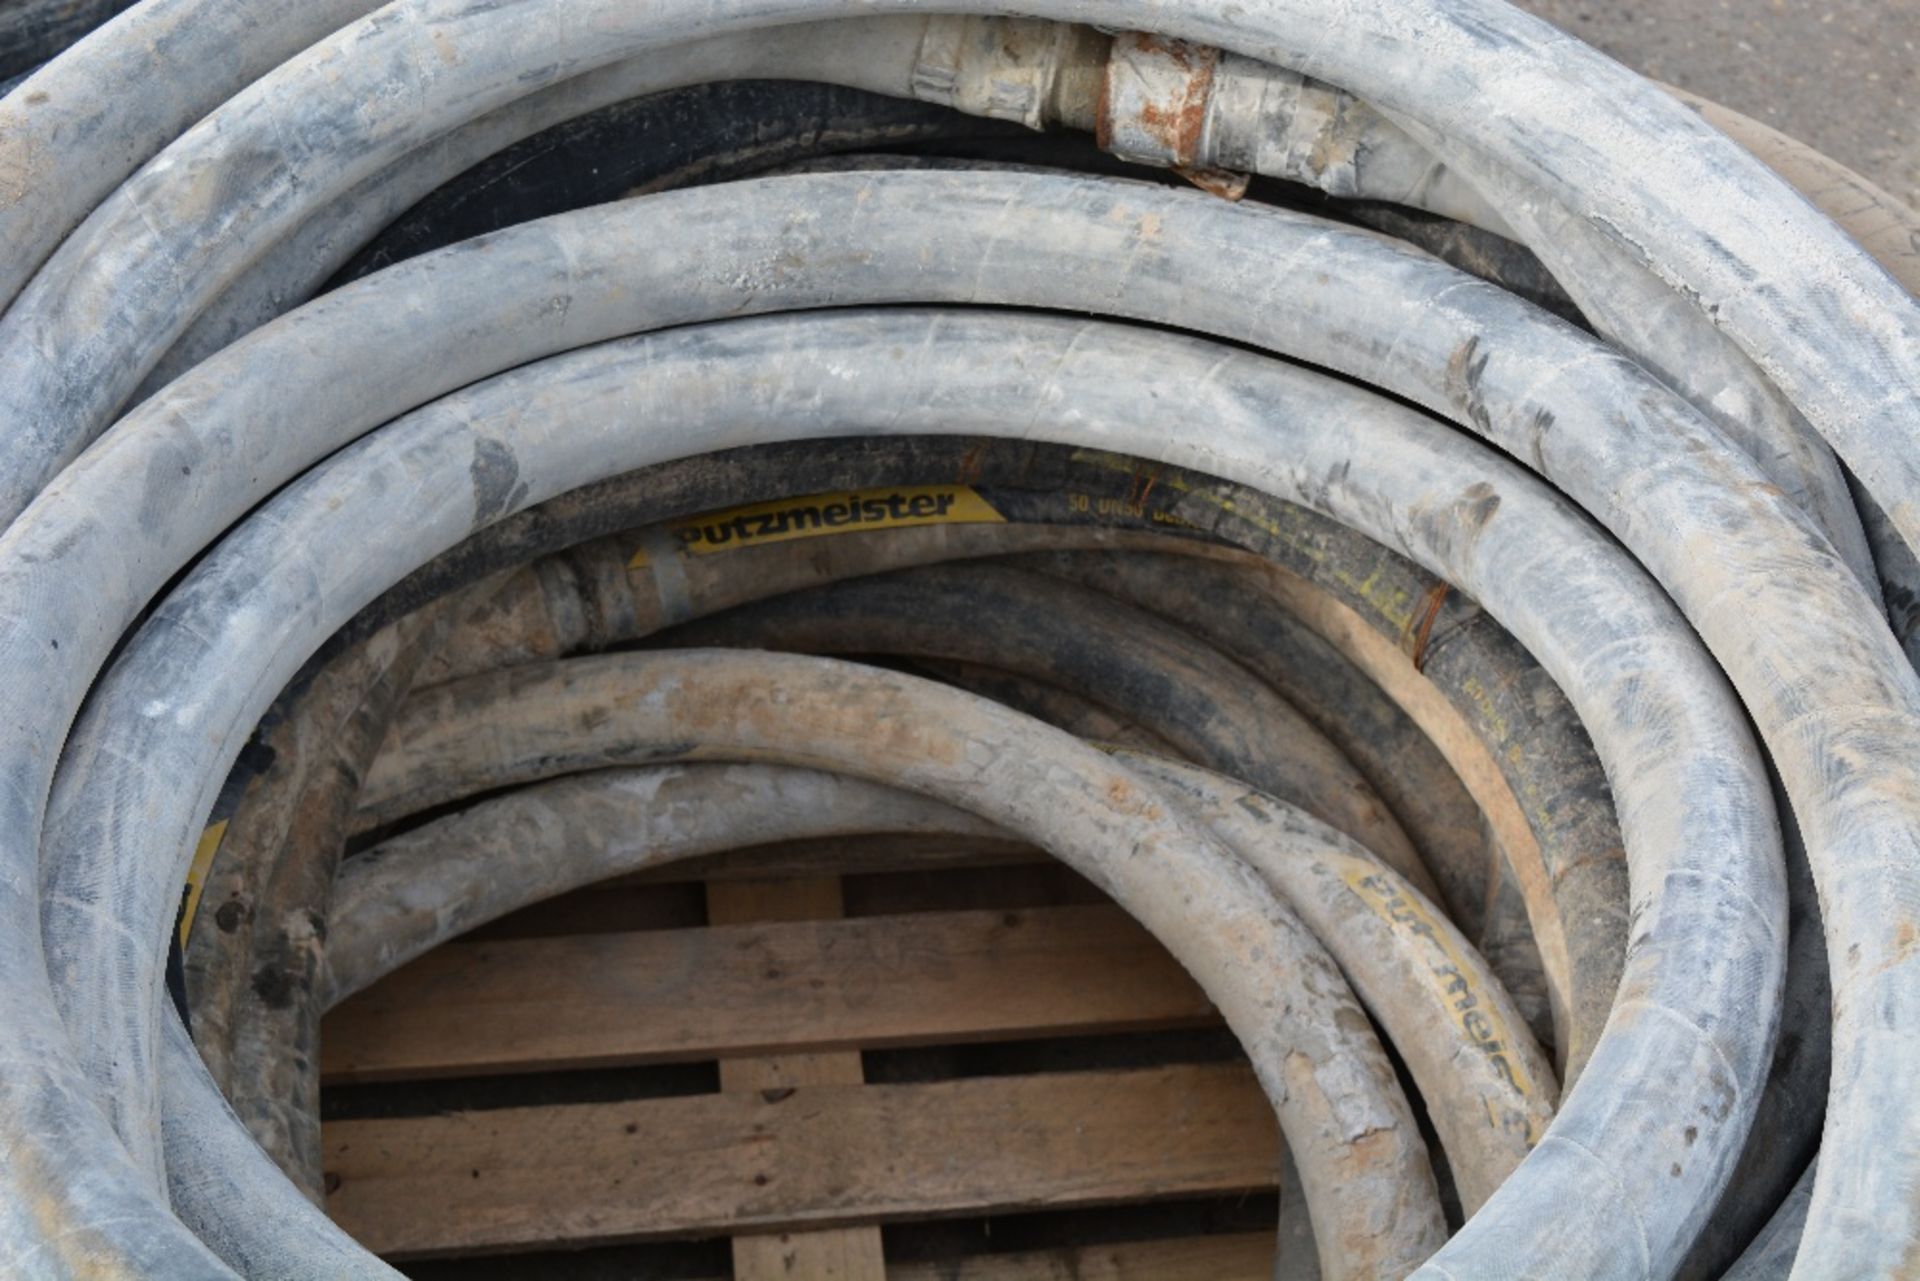 ASSORTED GROUT / SCREED PIPES (1 PALLET), ID: PL-15662, RUISLIP PLANT HIRE LTD. *UNRESERVED* - Image 3 of 3